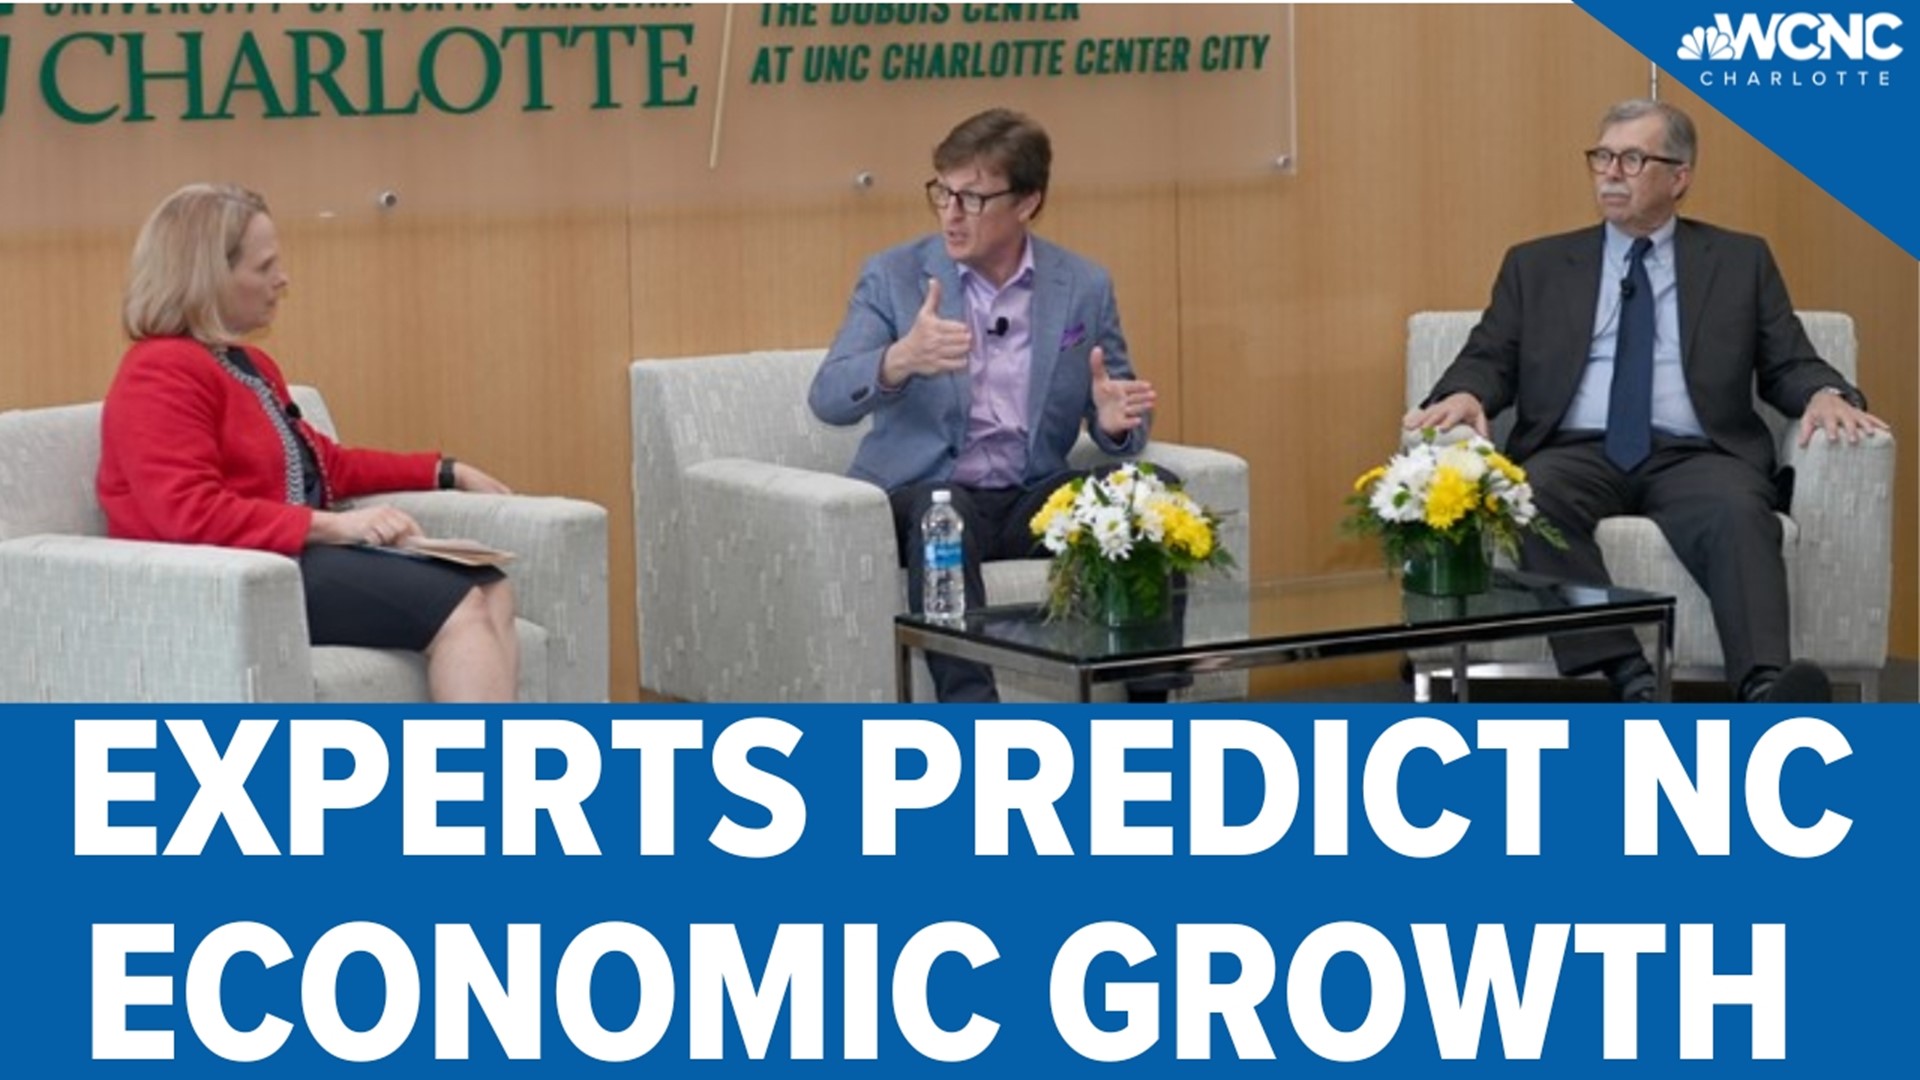 Charlotte-area experts believe North Carolina's economy will grow this year, with gross domestic product (GDP) increasing 1.6% since 2022.